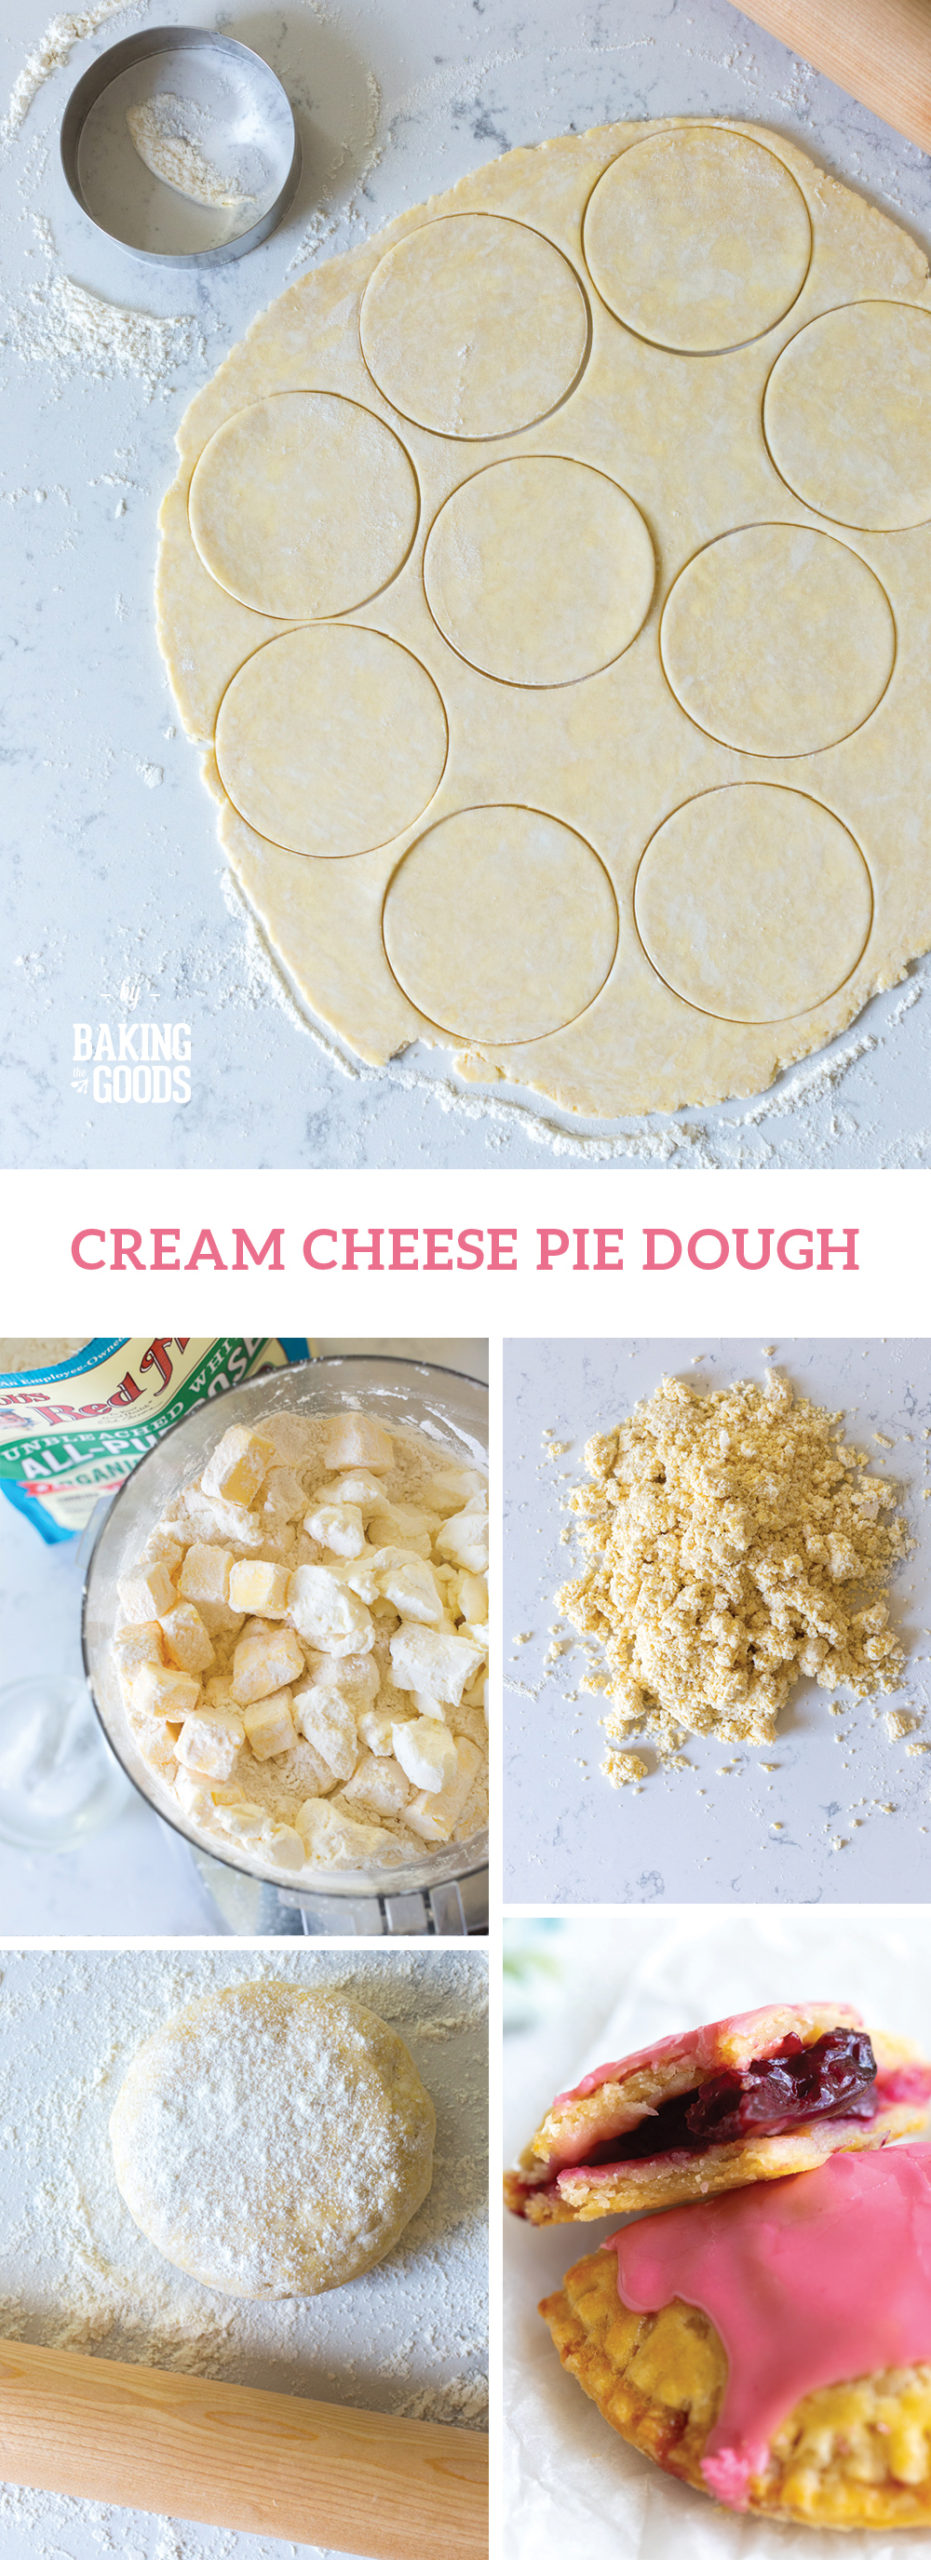 Cream Cheese Pie Dough by Baking The Goods